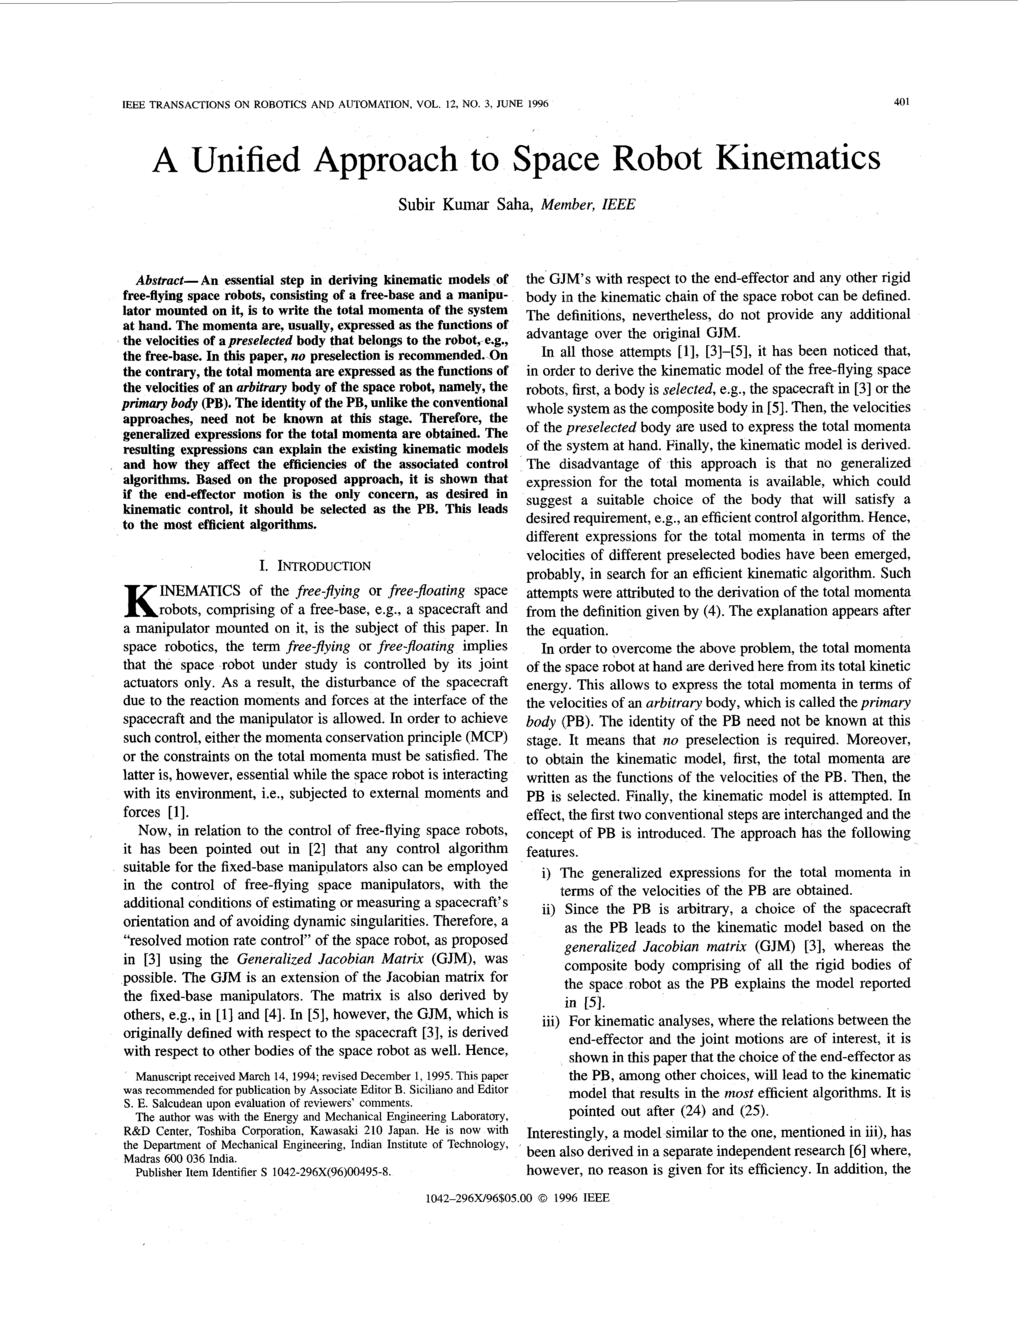 IEEE TRANSACTIONS ON ROBOTICS AND AUTOMATION, VOL 12, NO 3, JUNE 1996 401 A Unified Approach to Space Robot Kinematics Subir Kumar Saha, Member, IEEE Abstract-An essential step in deriving kinematic